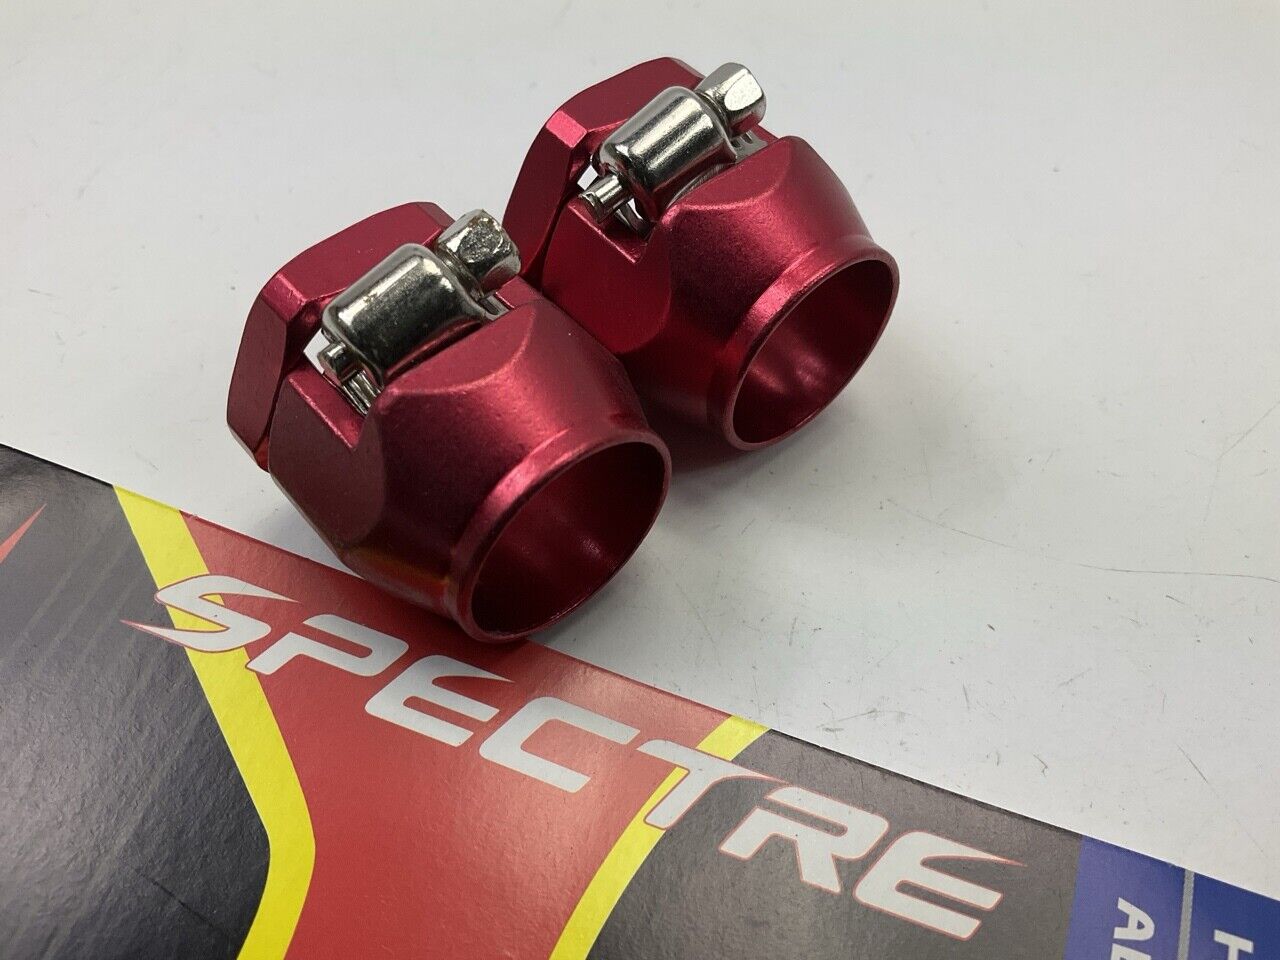 (2) Spectre 3162 Hose Clamps Magna-Clamp Red Anodized For 1/2